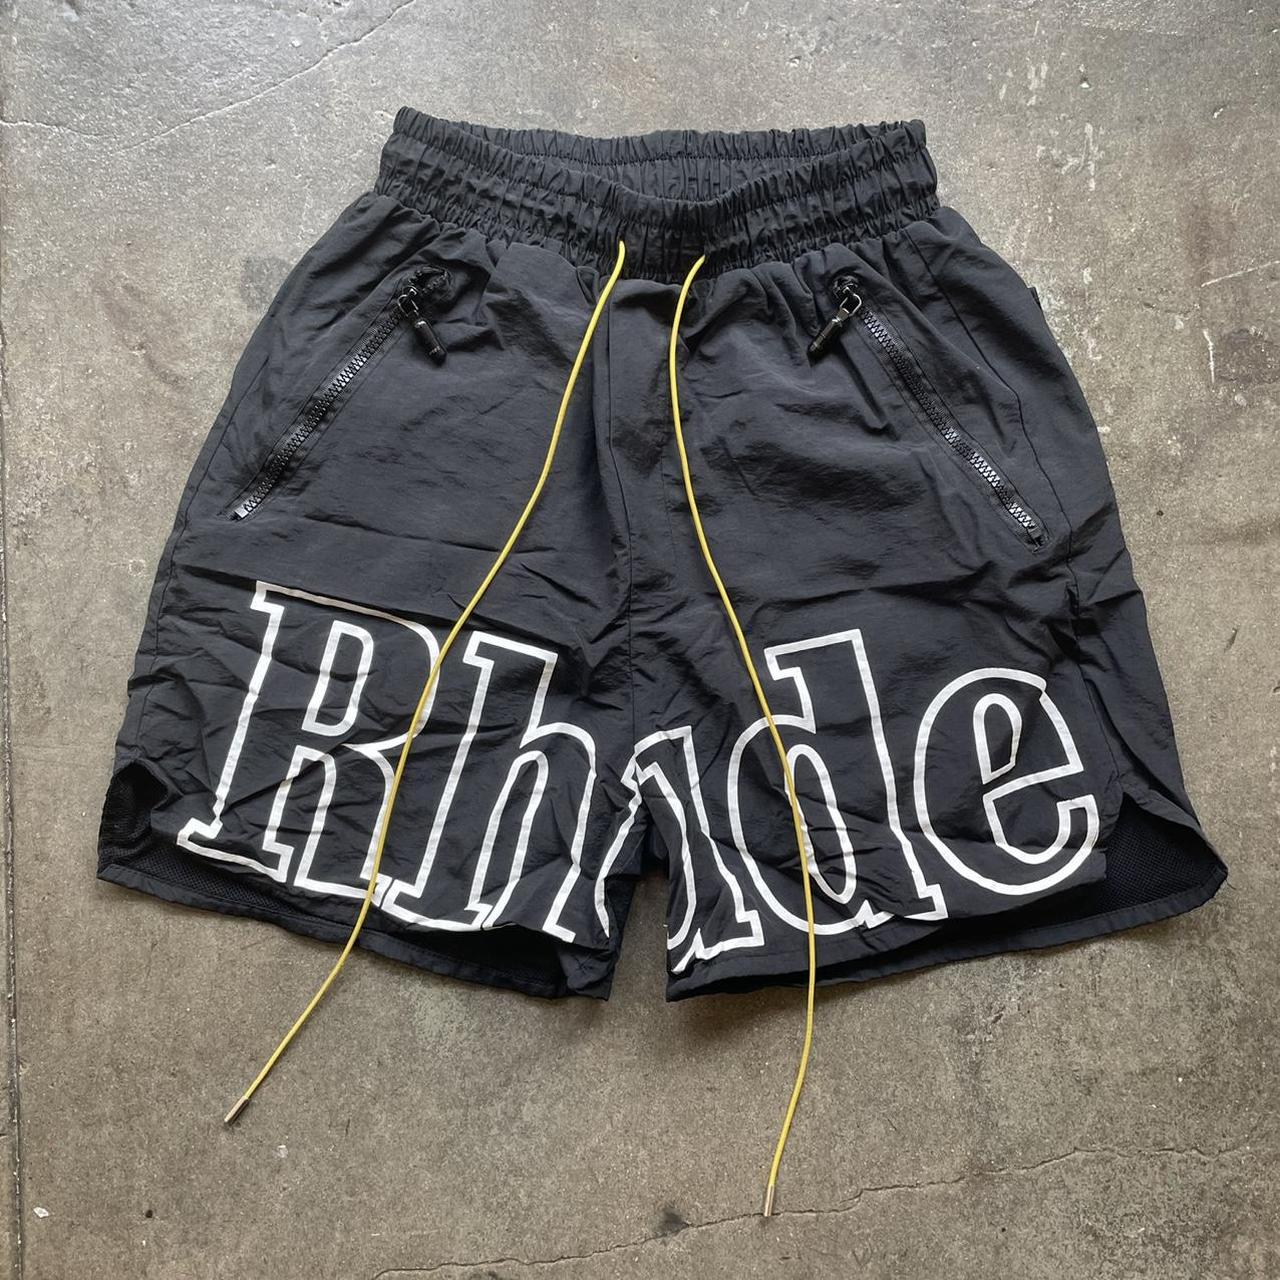 Product Image 1 - Rhude shorts 
Pill zippers
Made in